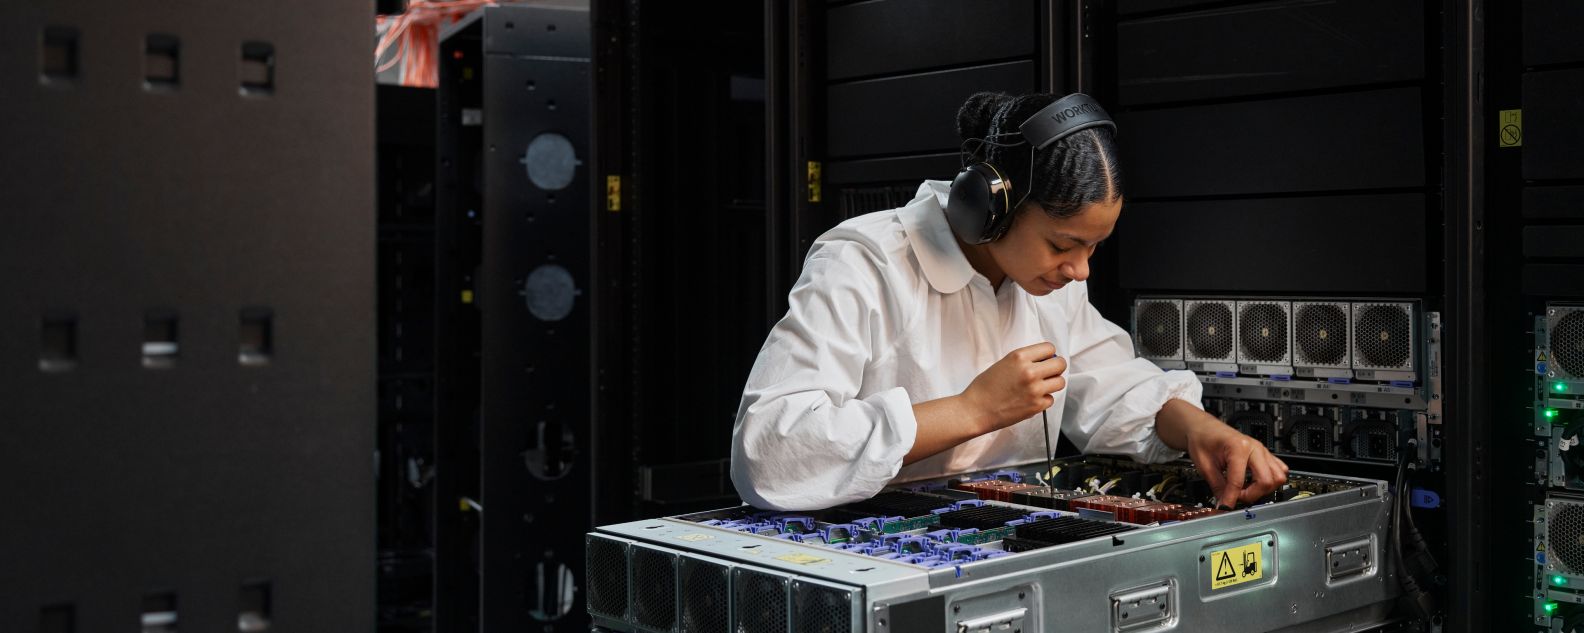 Person wearing headphones while working on computer equipment